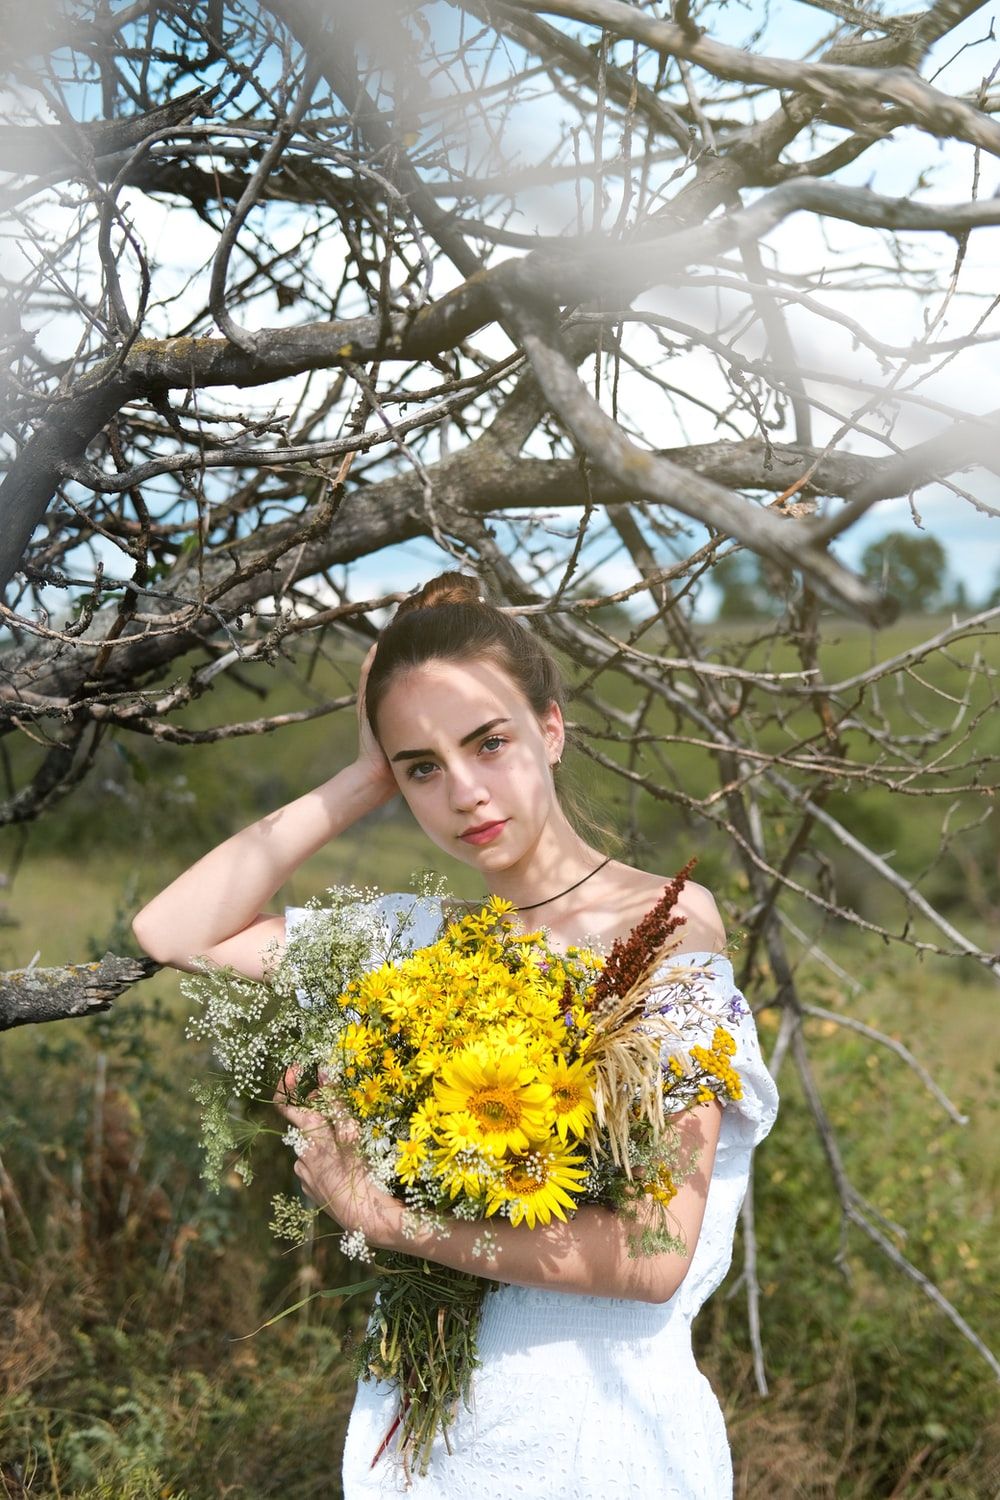 Girl With Flowers Picture. Download Free Image